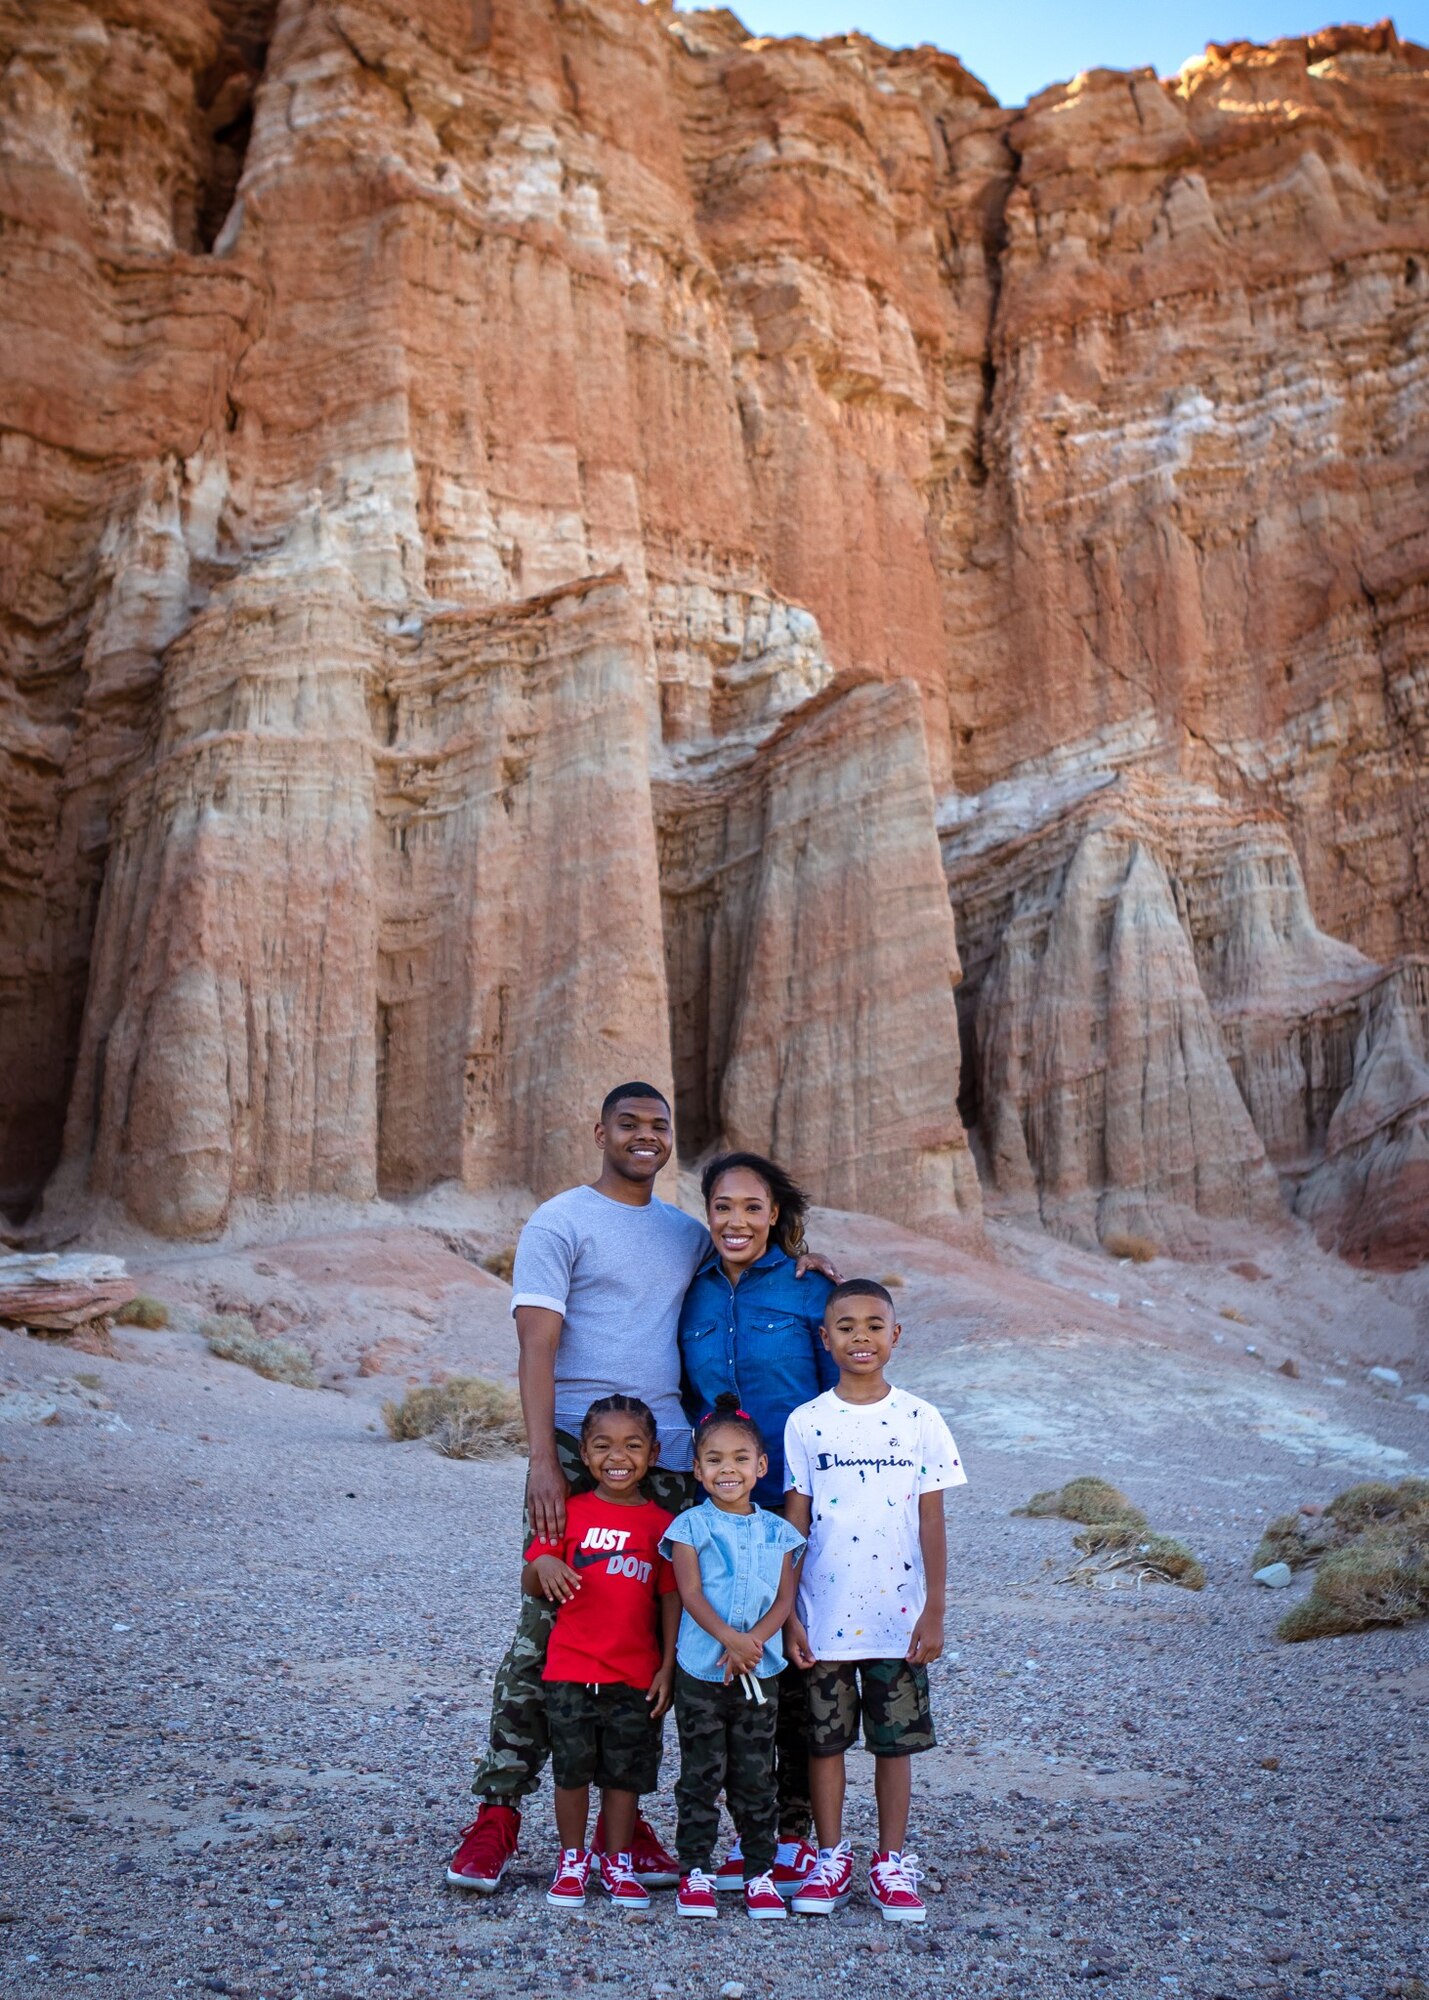 Tech Sgt. Bionca Thomas, Detachment 2 of the 9th Operations Group, takes a photo with her family on a recent vacation in California. Thomas recently achieved the rare milestone of achieving her Ph.D. Within the Air Force Enlisted Force, just 0.0377% possess professional or doctorate degrees.